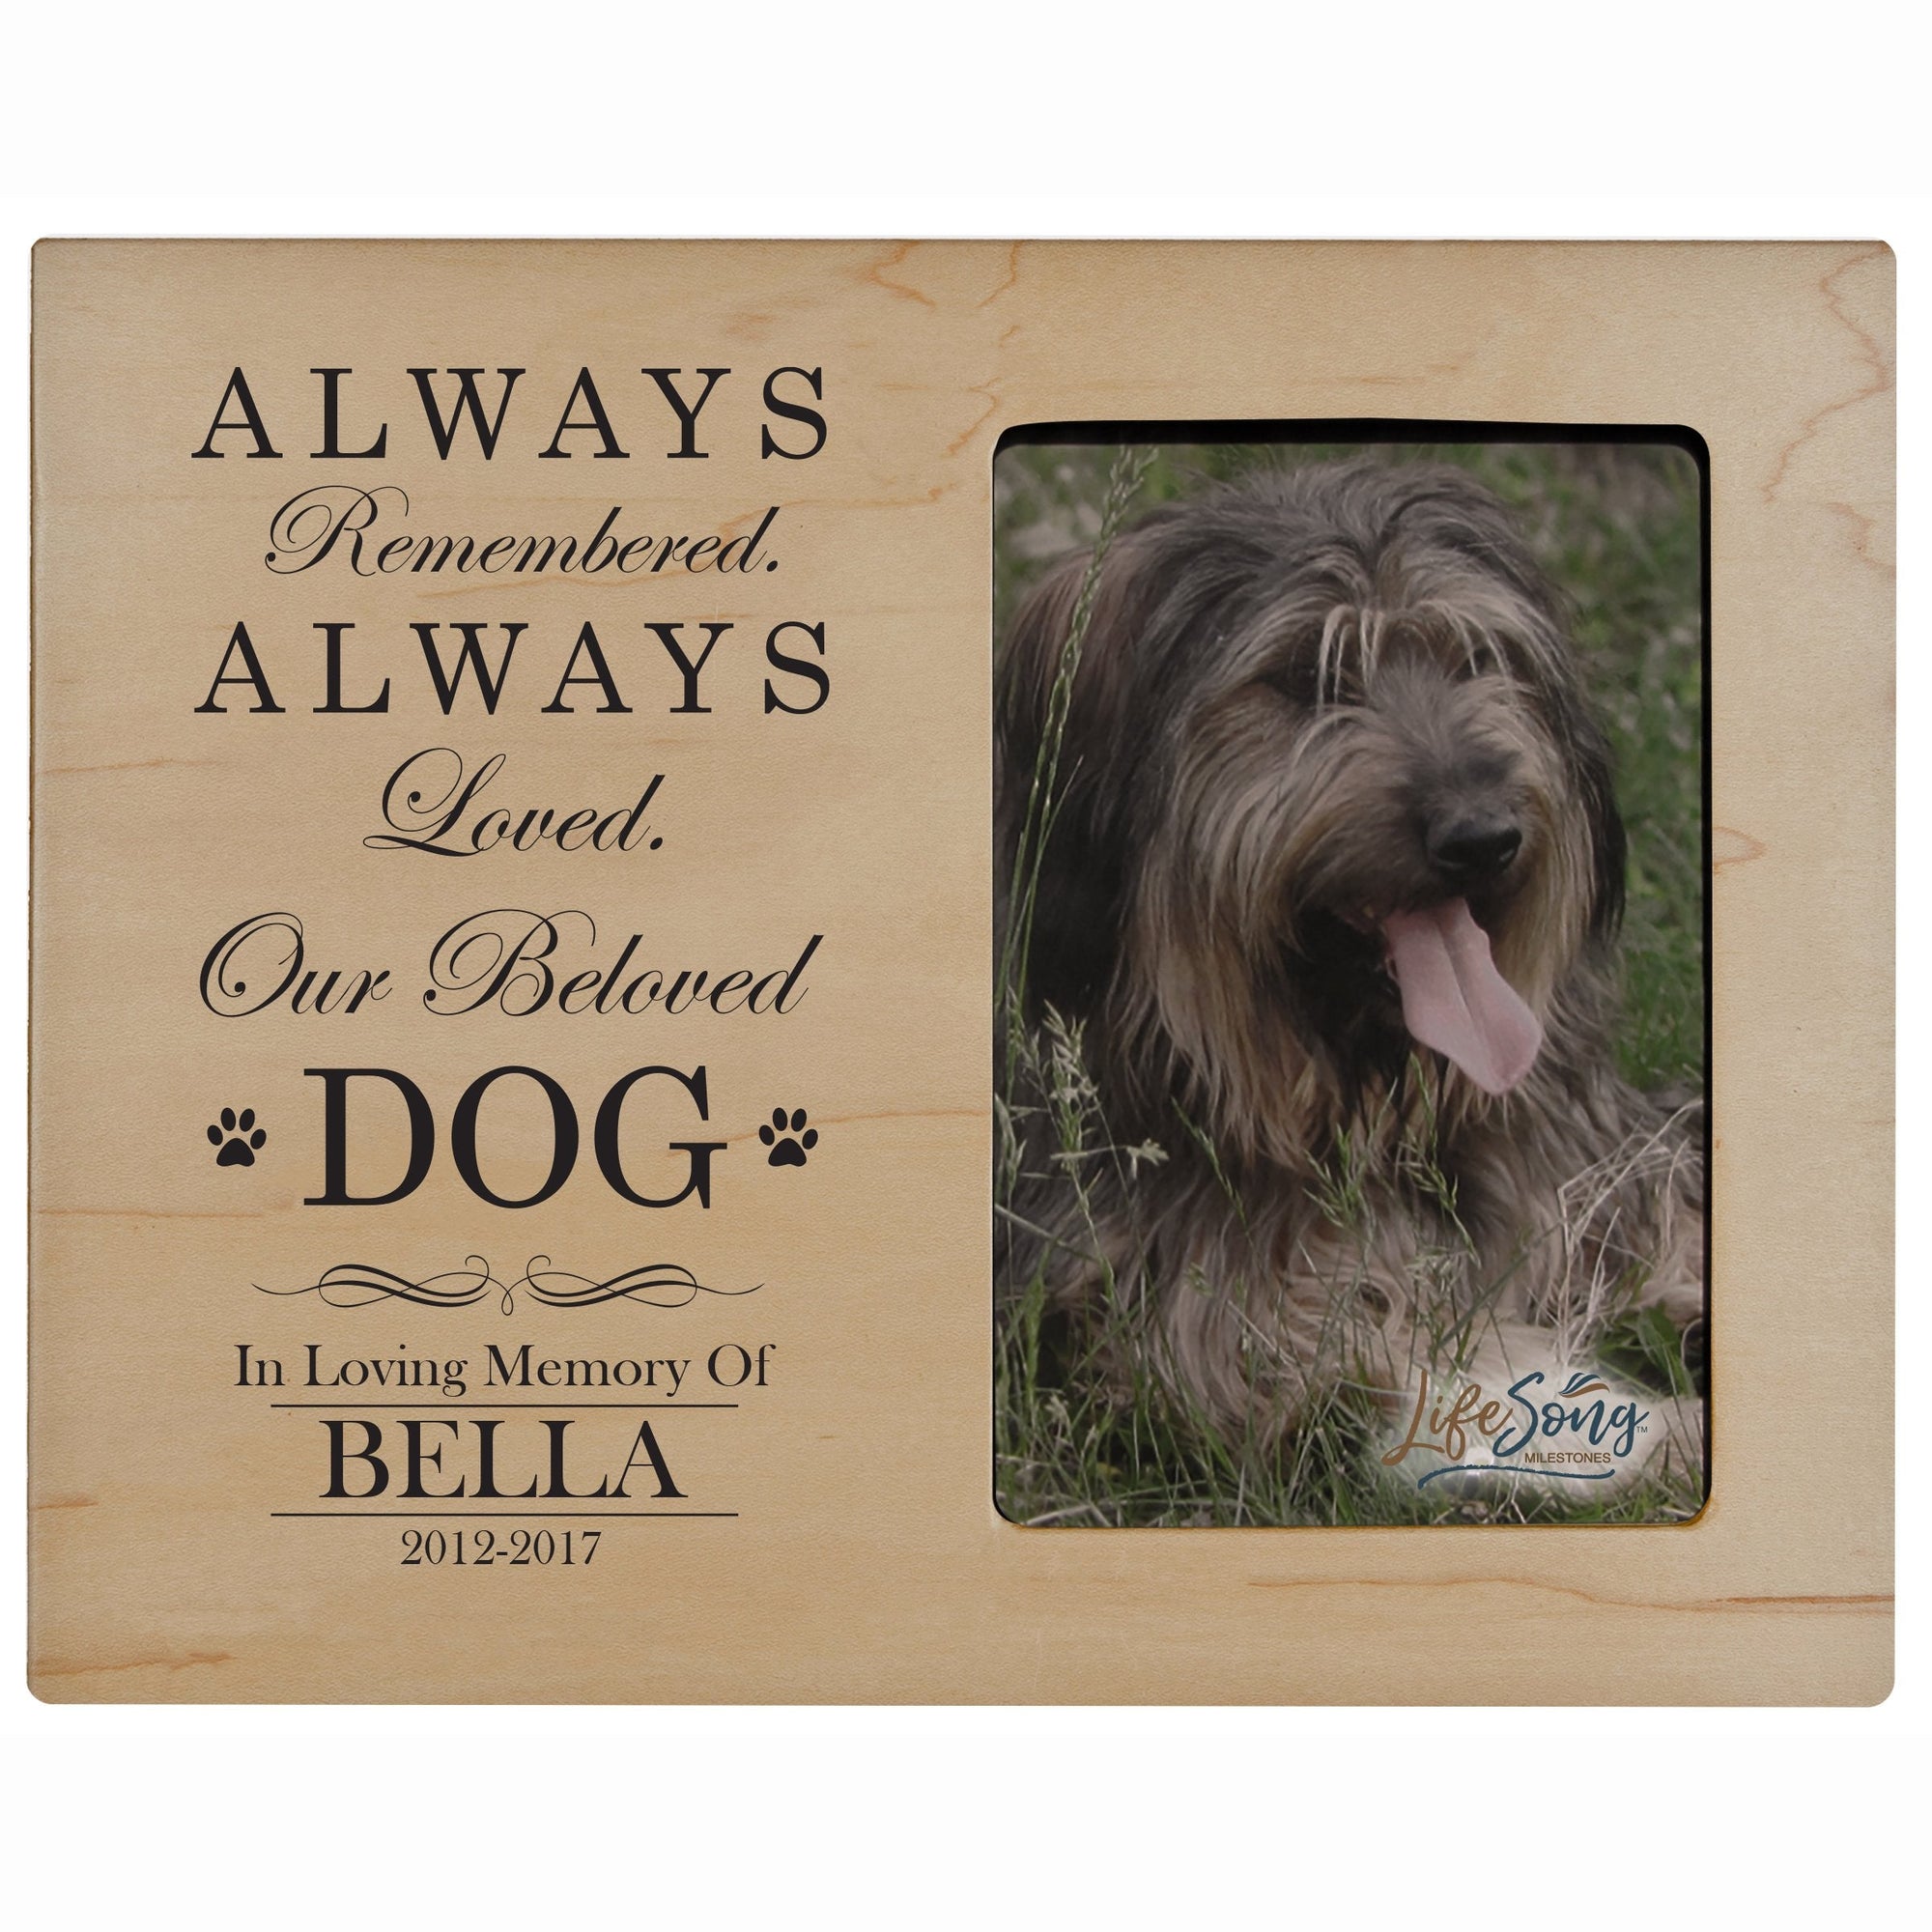 8x10 Maple Pet Memorial Picture Frame with the phrase "Always Remembered, Always Loved"